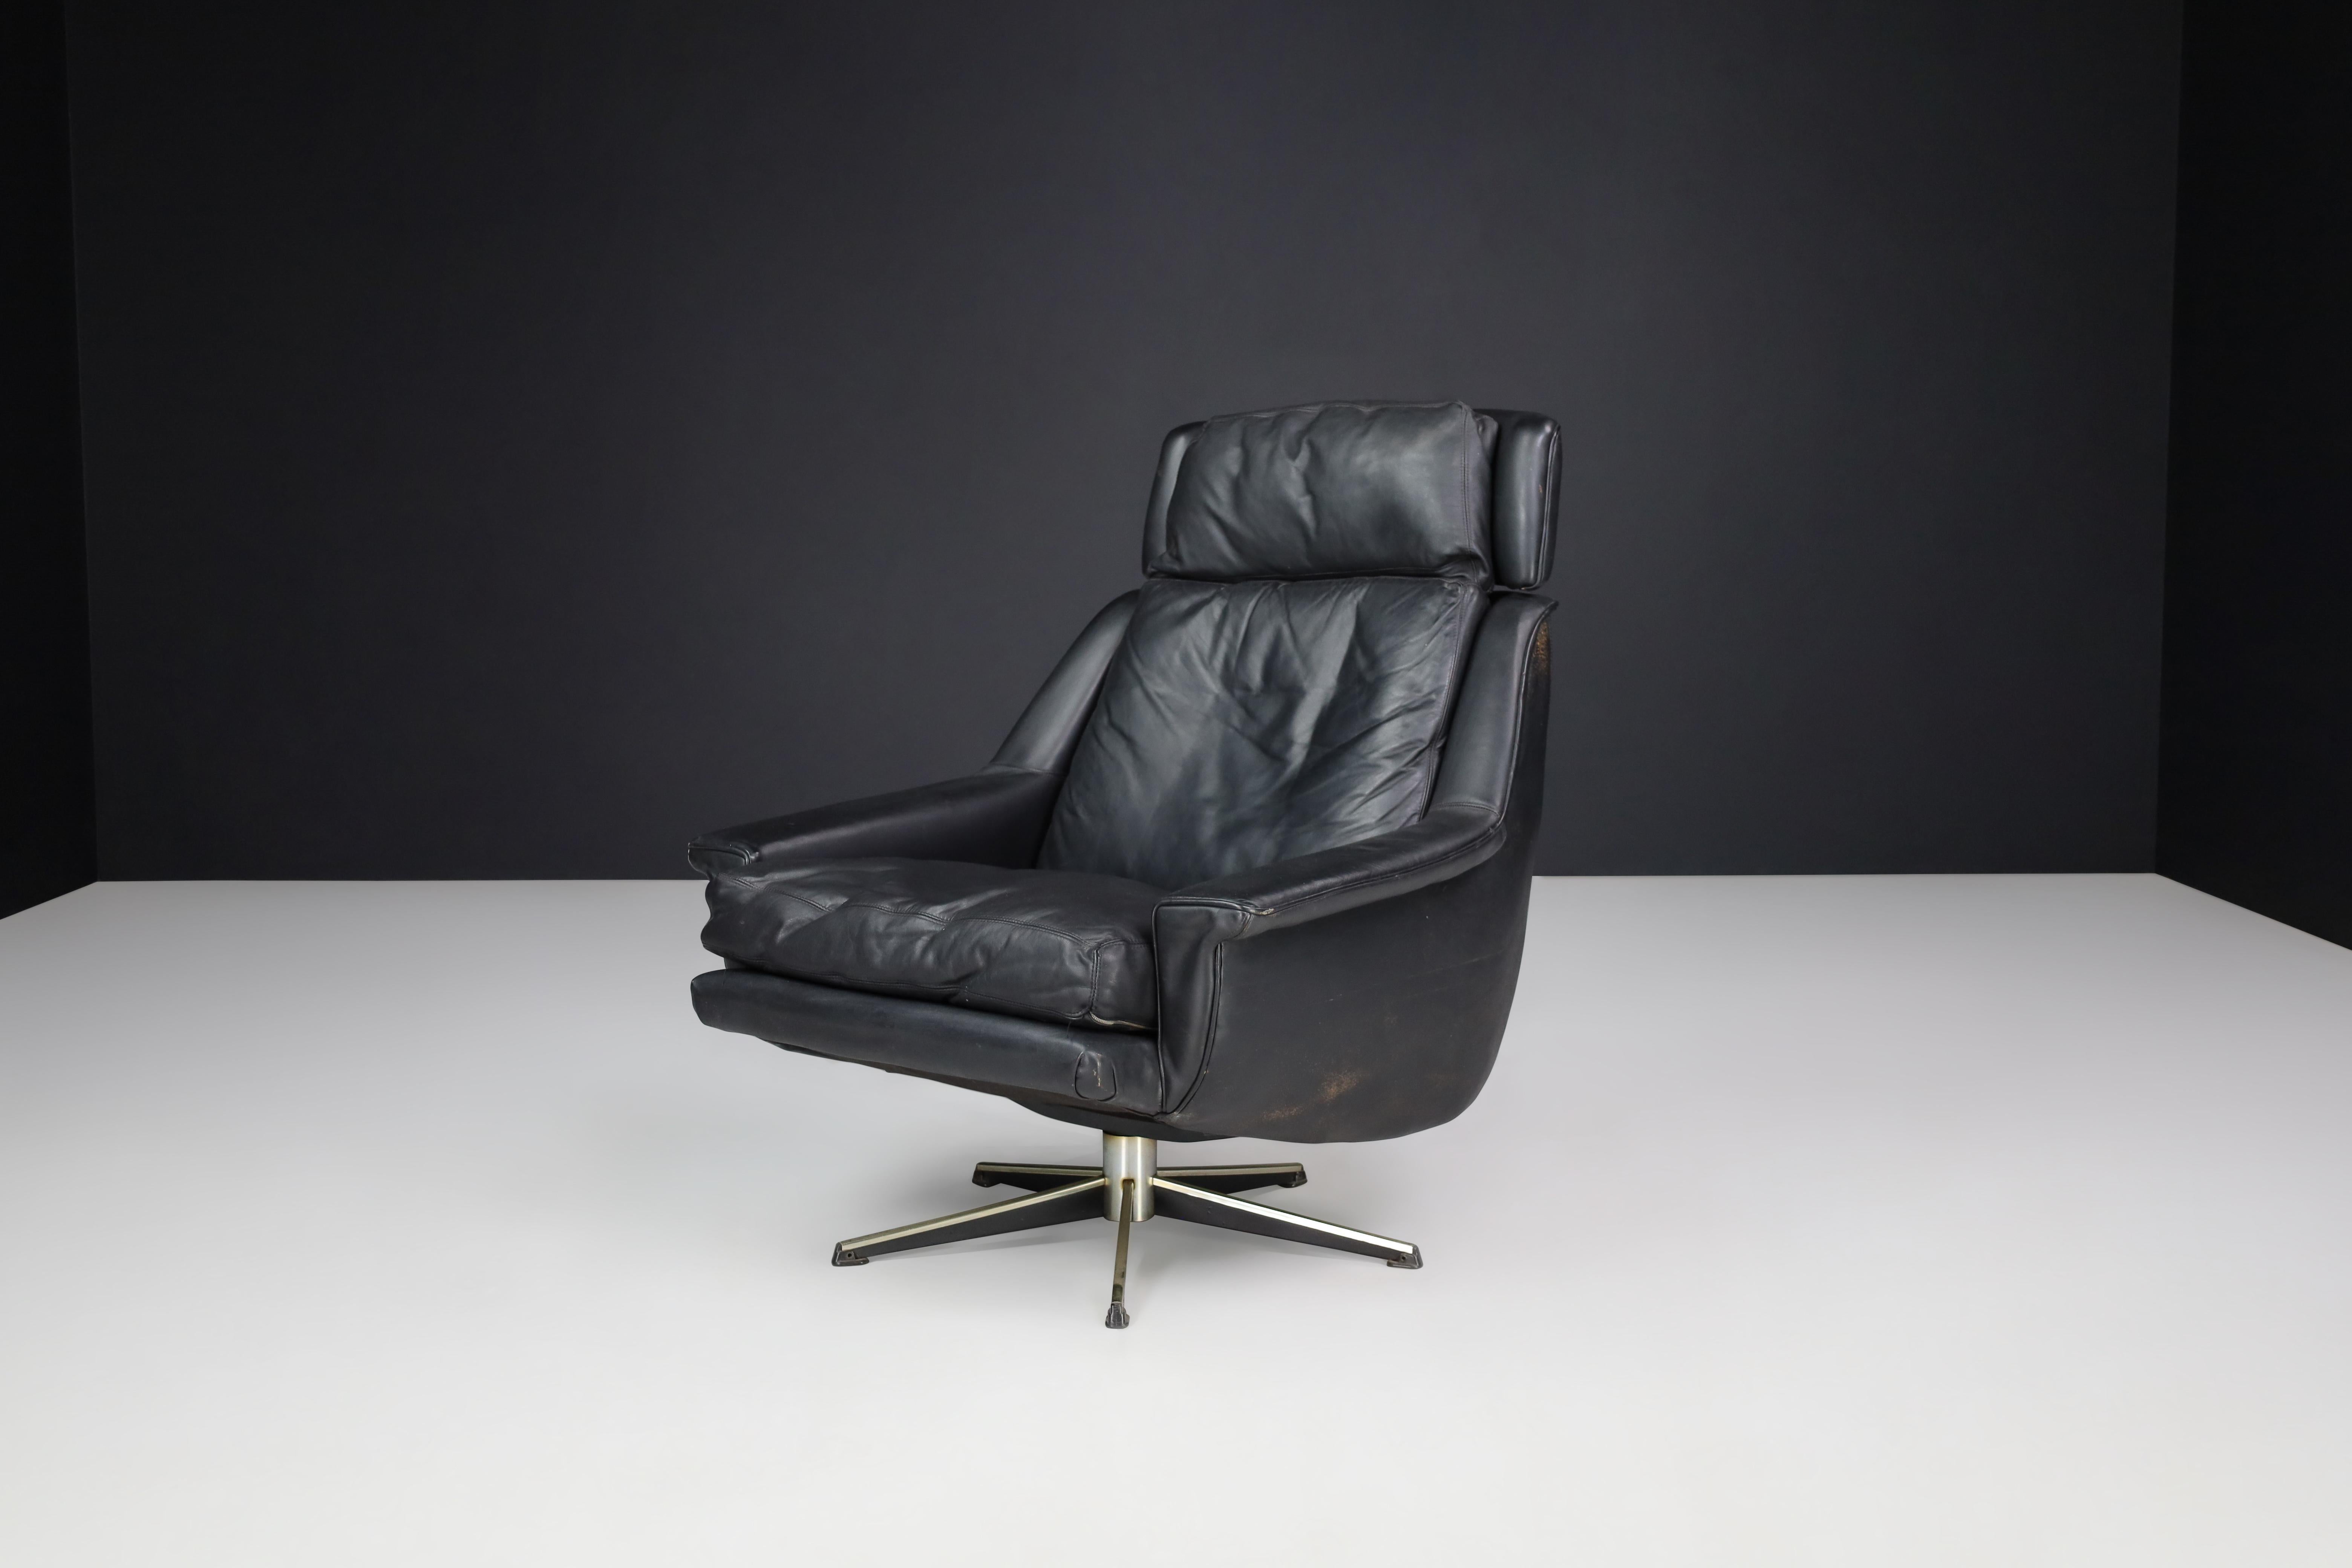 Werner Langefeld For ESA Møbelværk Patinated Leather Lounge Chair Denmark 1960s

This lounge chair, designed by Werner Langefeld for ESA Møbelværk in Denmark, was created in 1960 and remains in its original condition. It features a swivel base